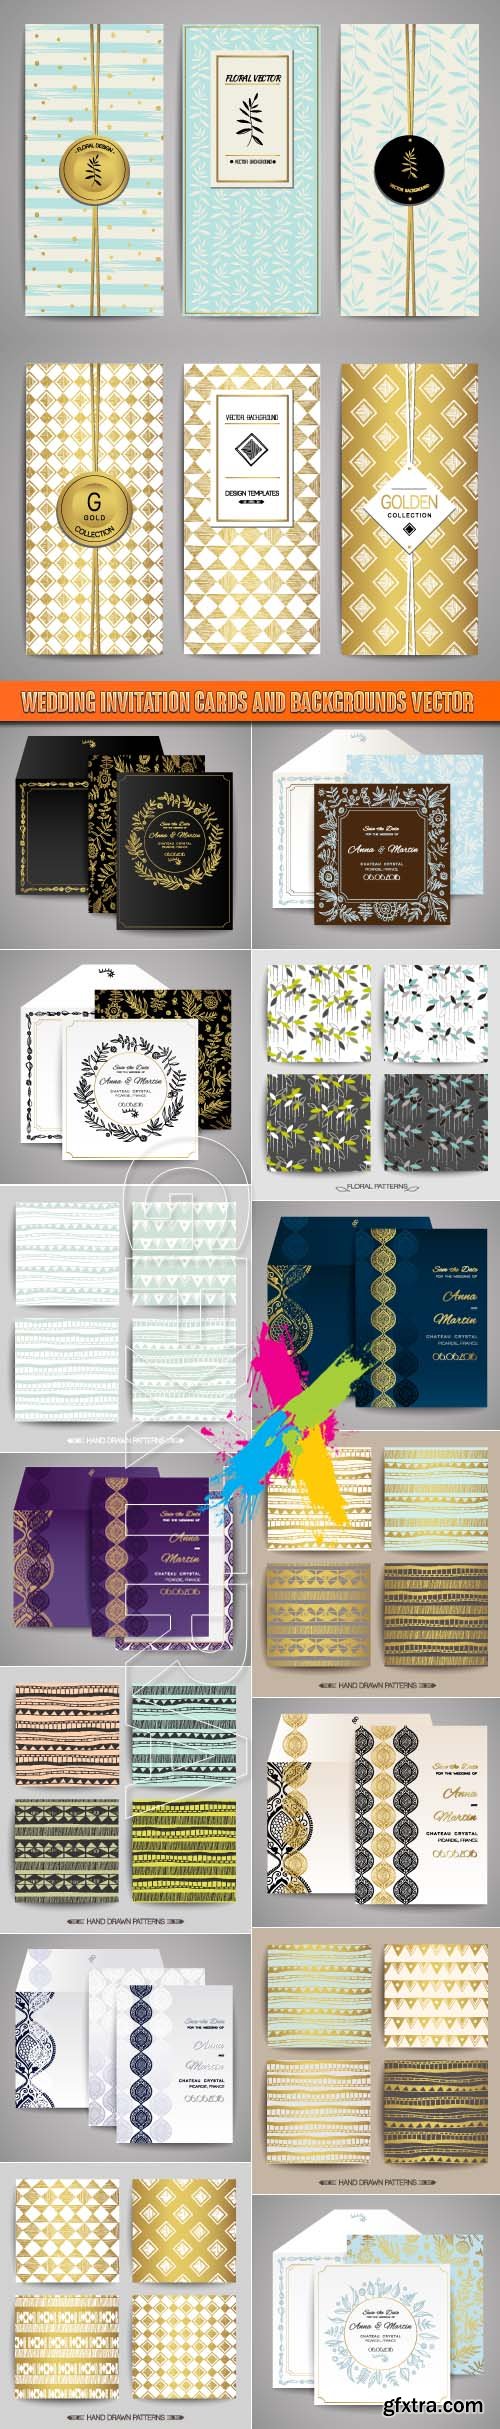 Wedding invitation cards and backgrounds vector